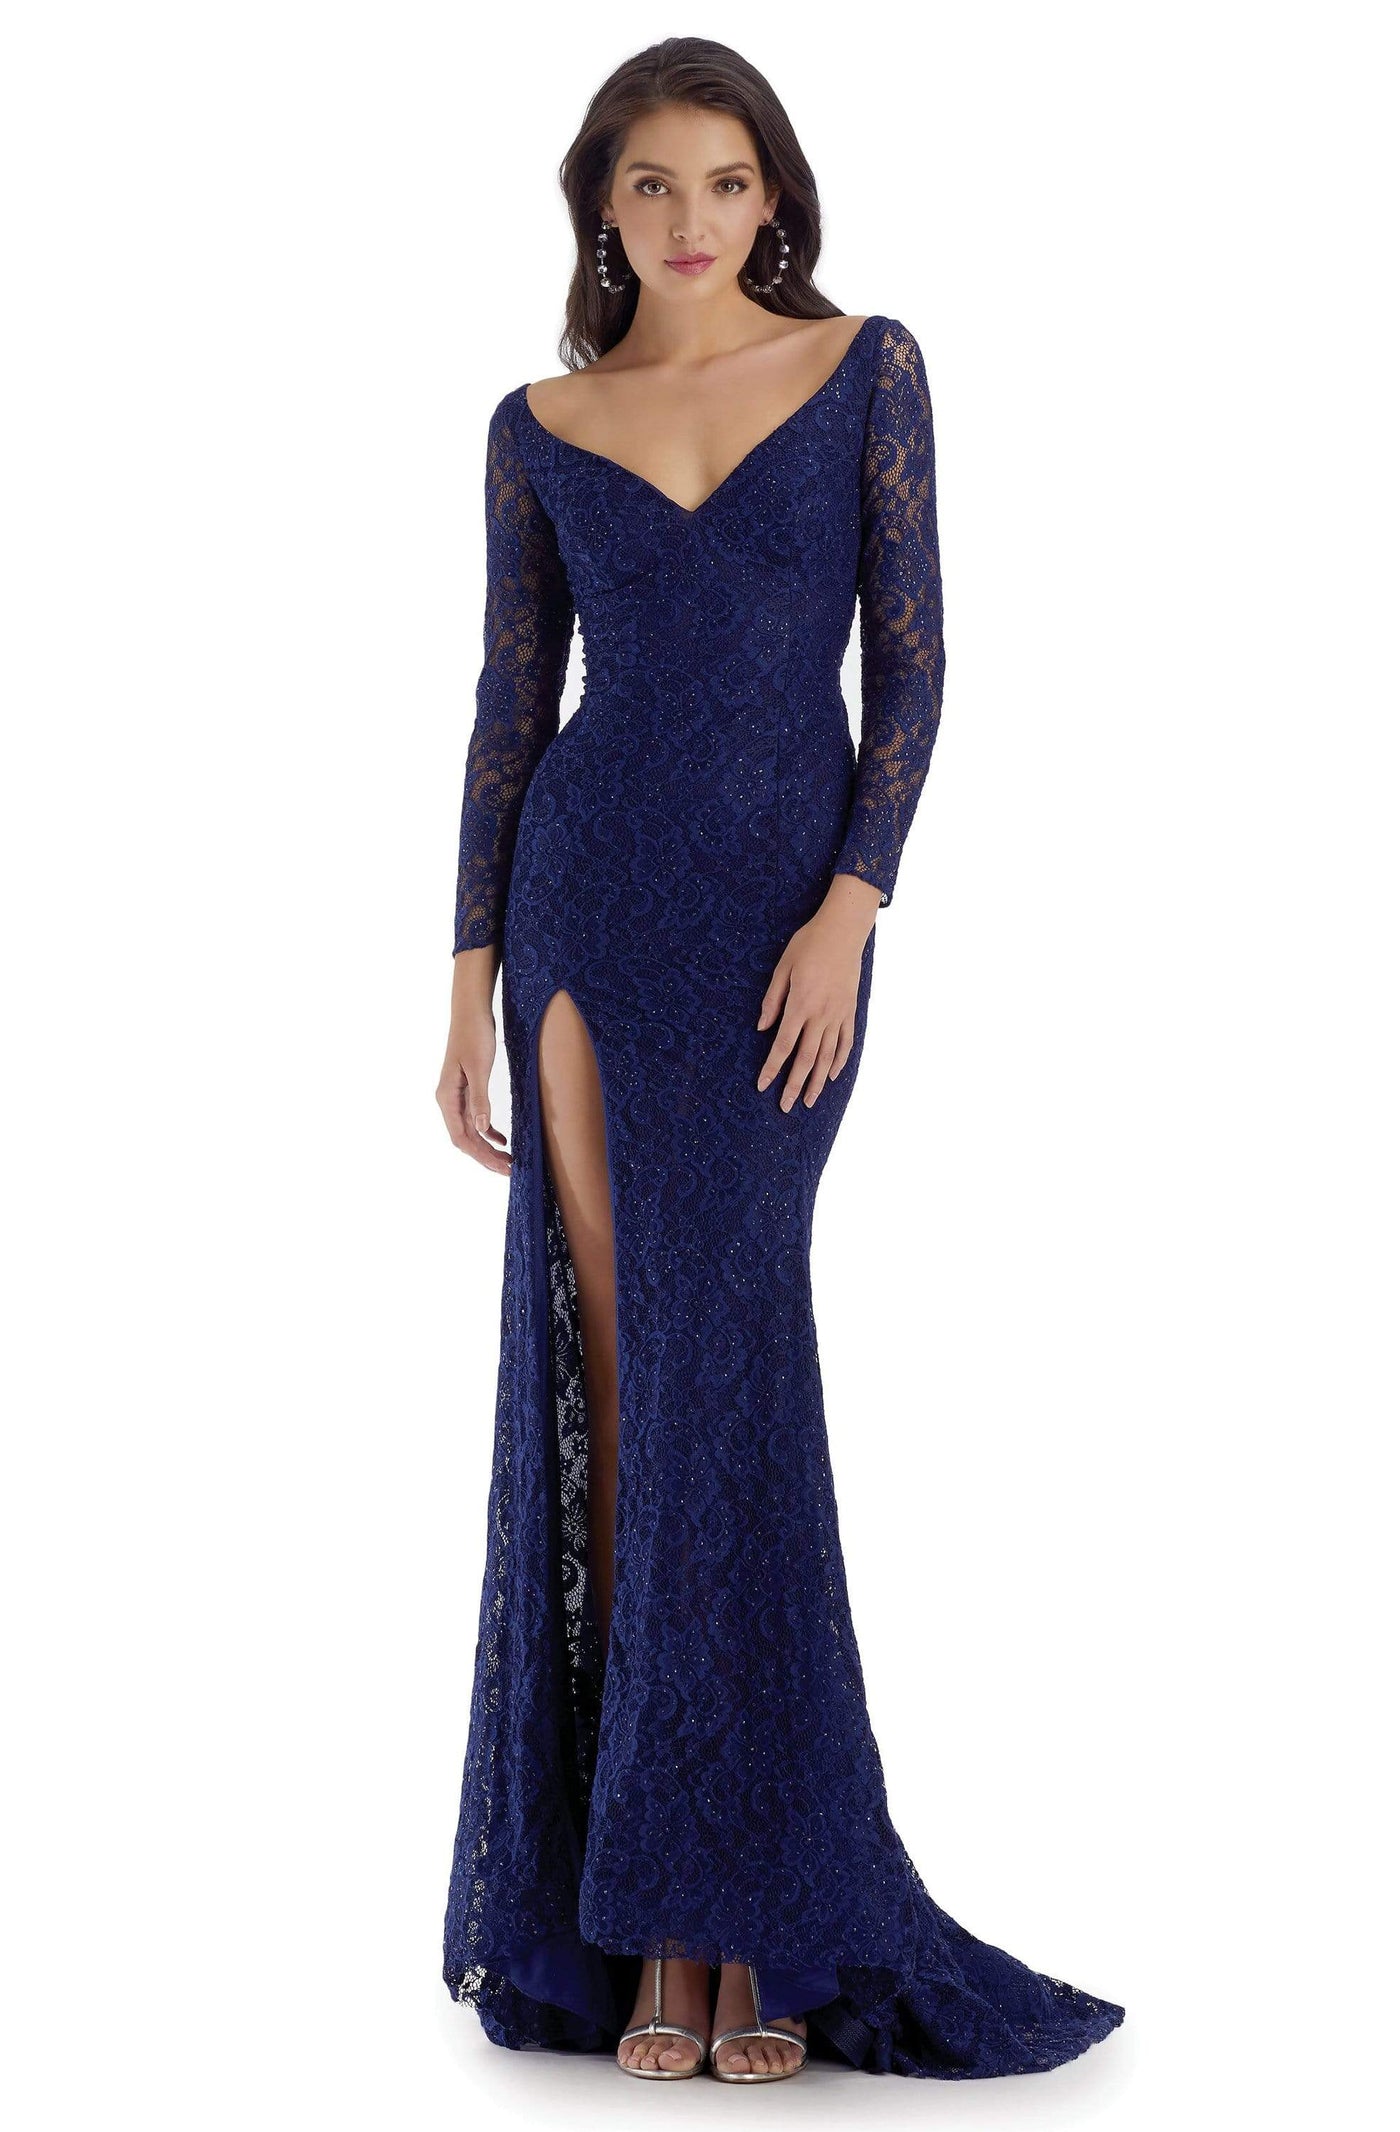 Clarisse - 5134 Long Sleeve V Neck Beaded Lace Long Fitted Dress Evening Dresses 0 / Navy